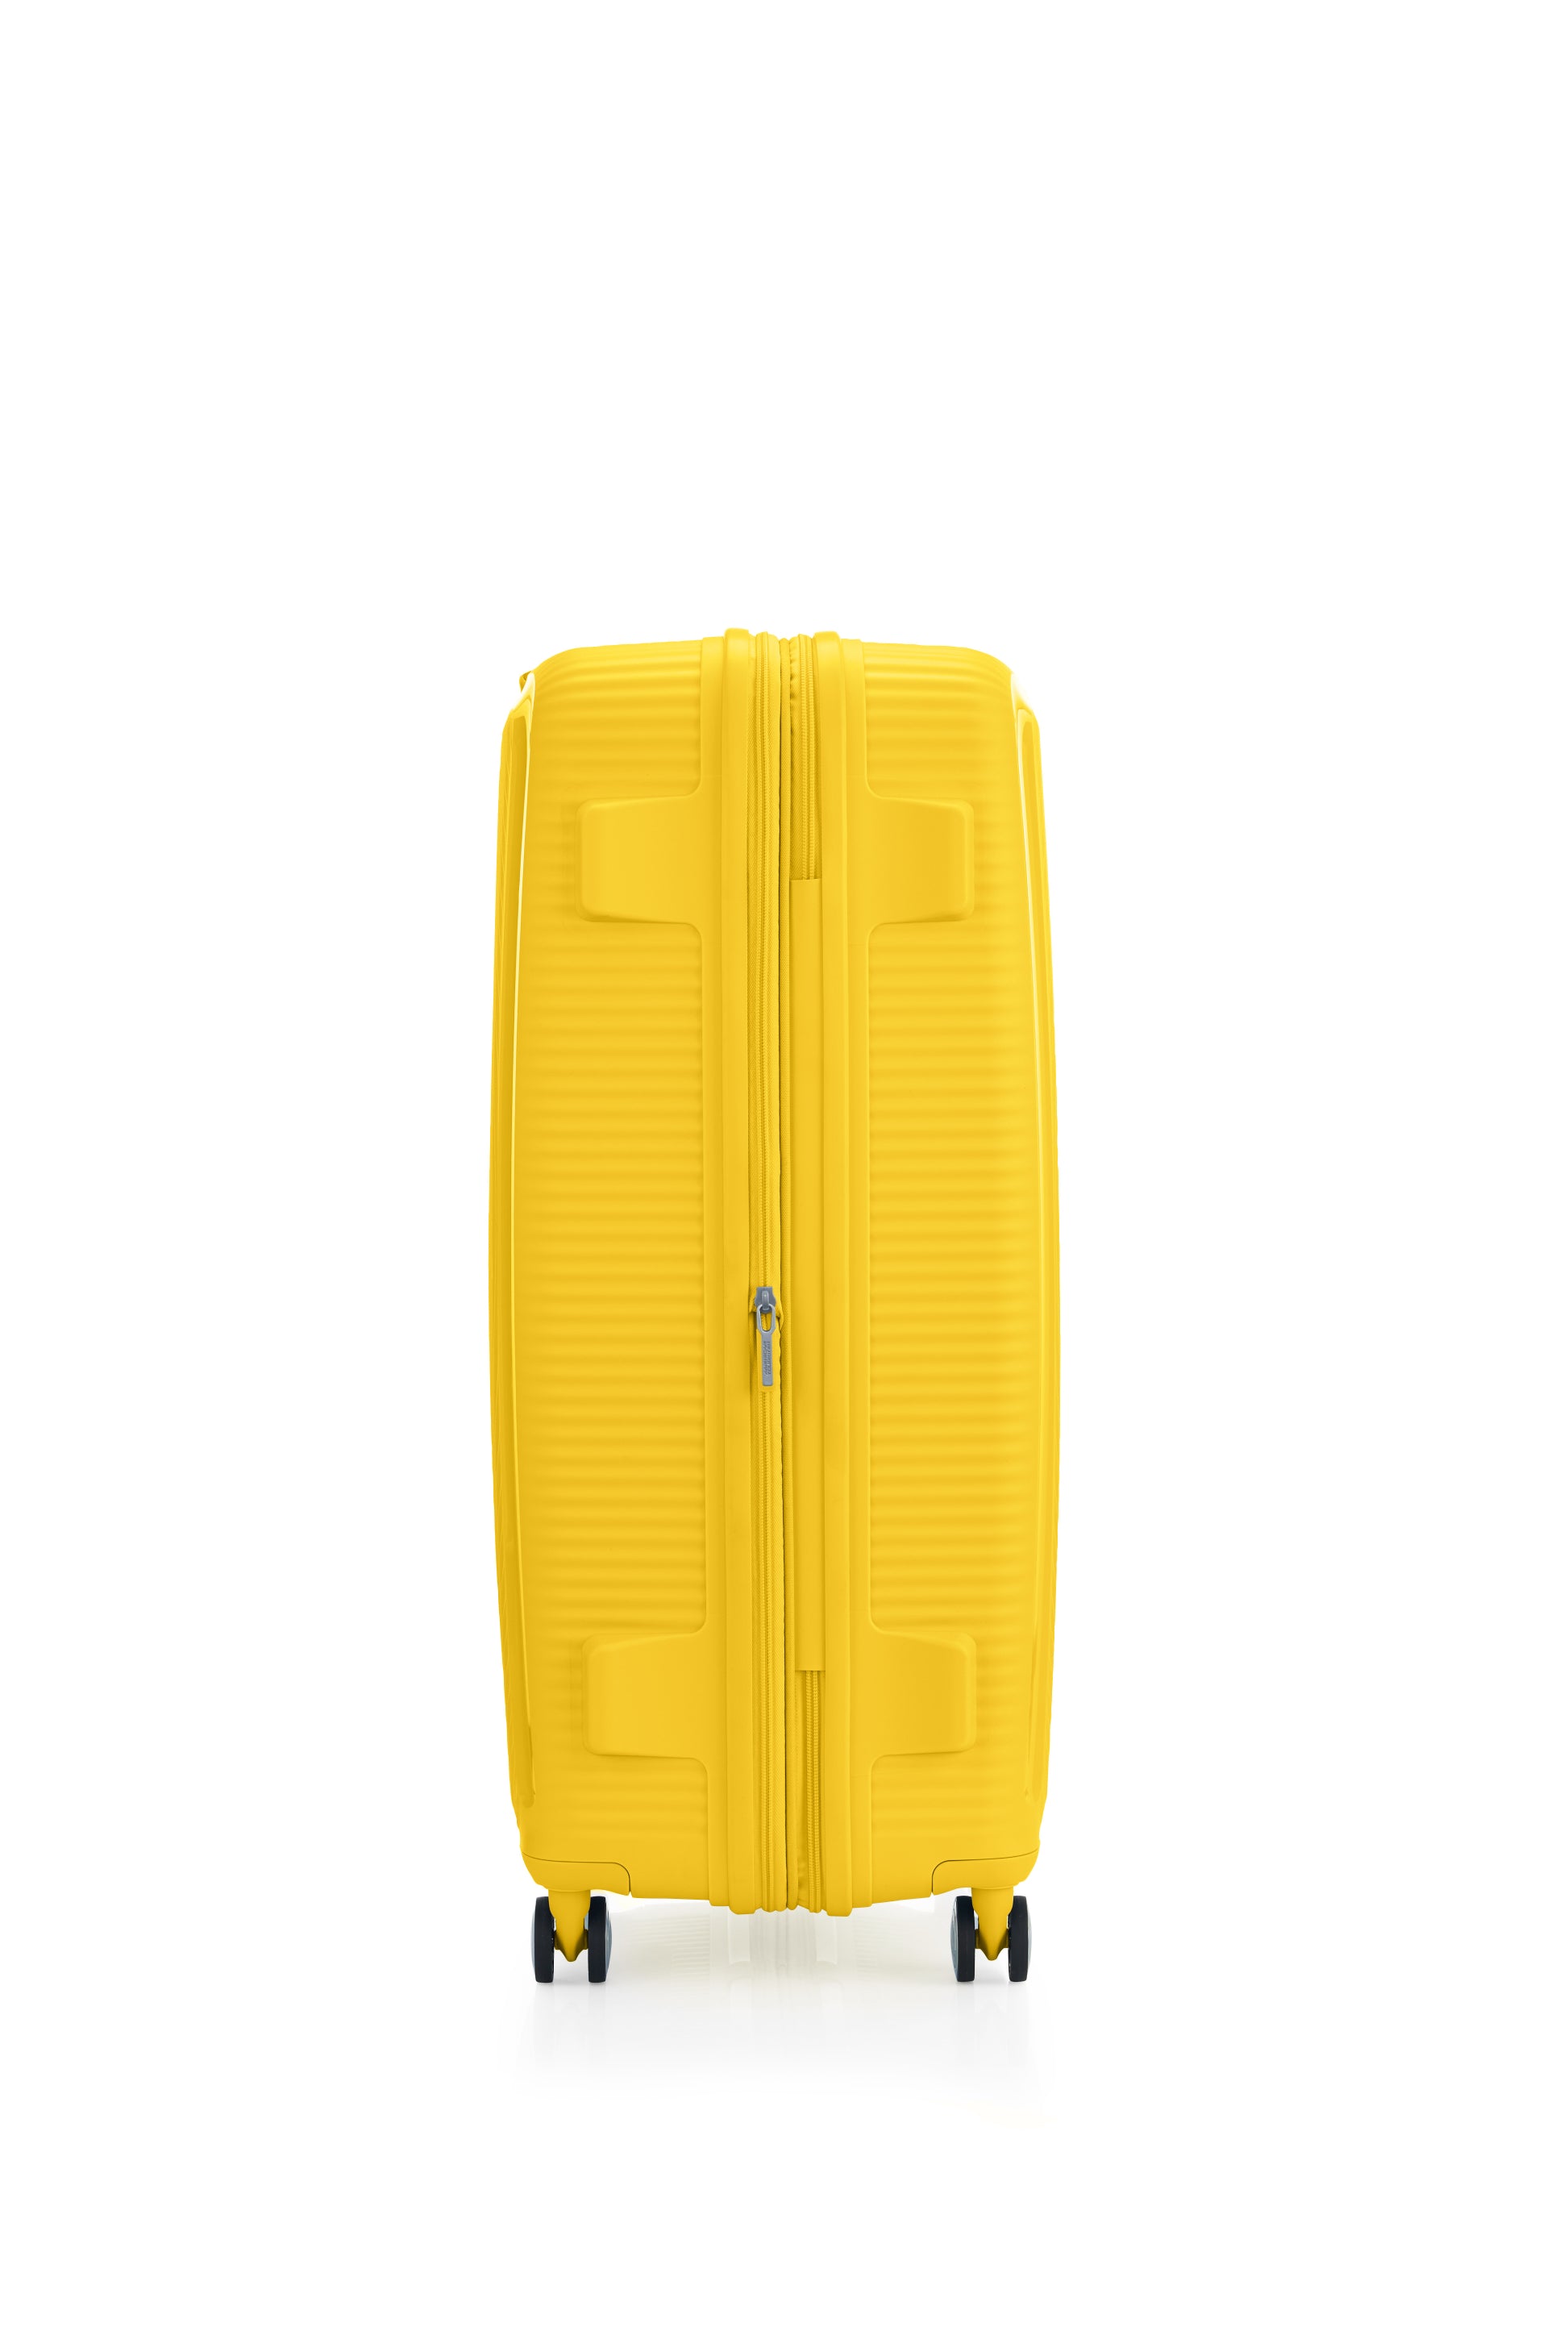 American Tourister - Curio 2.0 80cm Large Suitcase - Golden Yellow-2